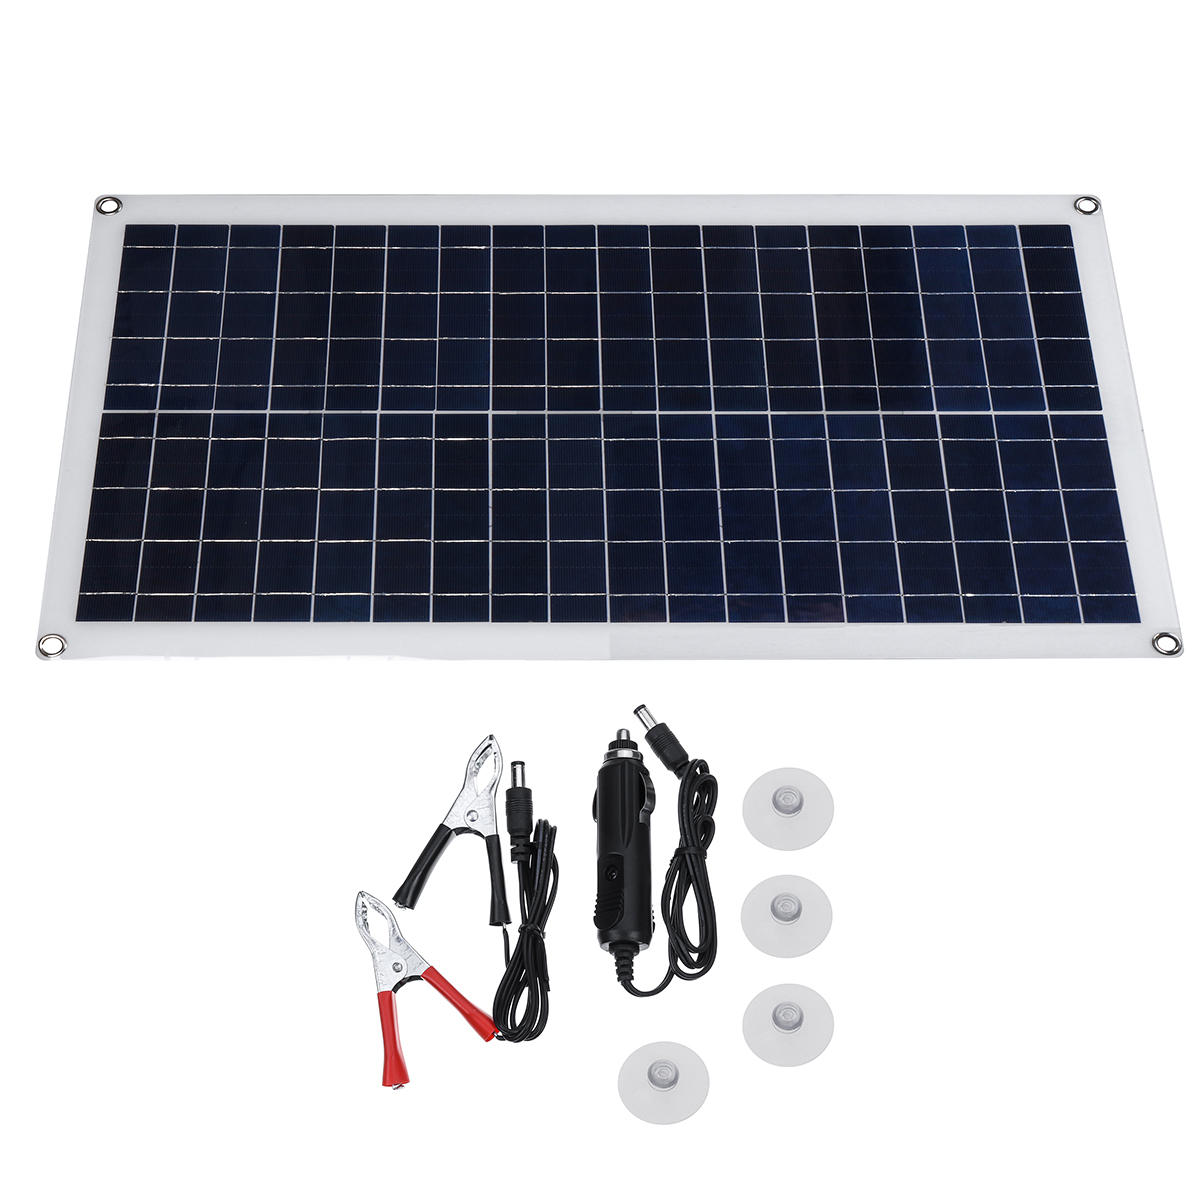 

18v 40W 630*370*3.0mm Dual USB Interface PET Polysilicon Solar Panel with Line + 4 Suction Cup Set for 12V Battery Charg